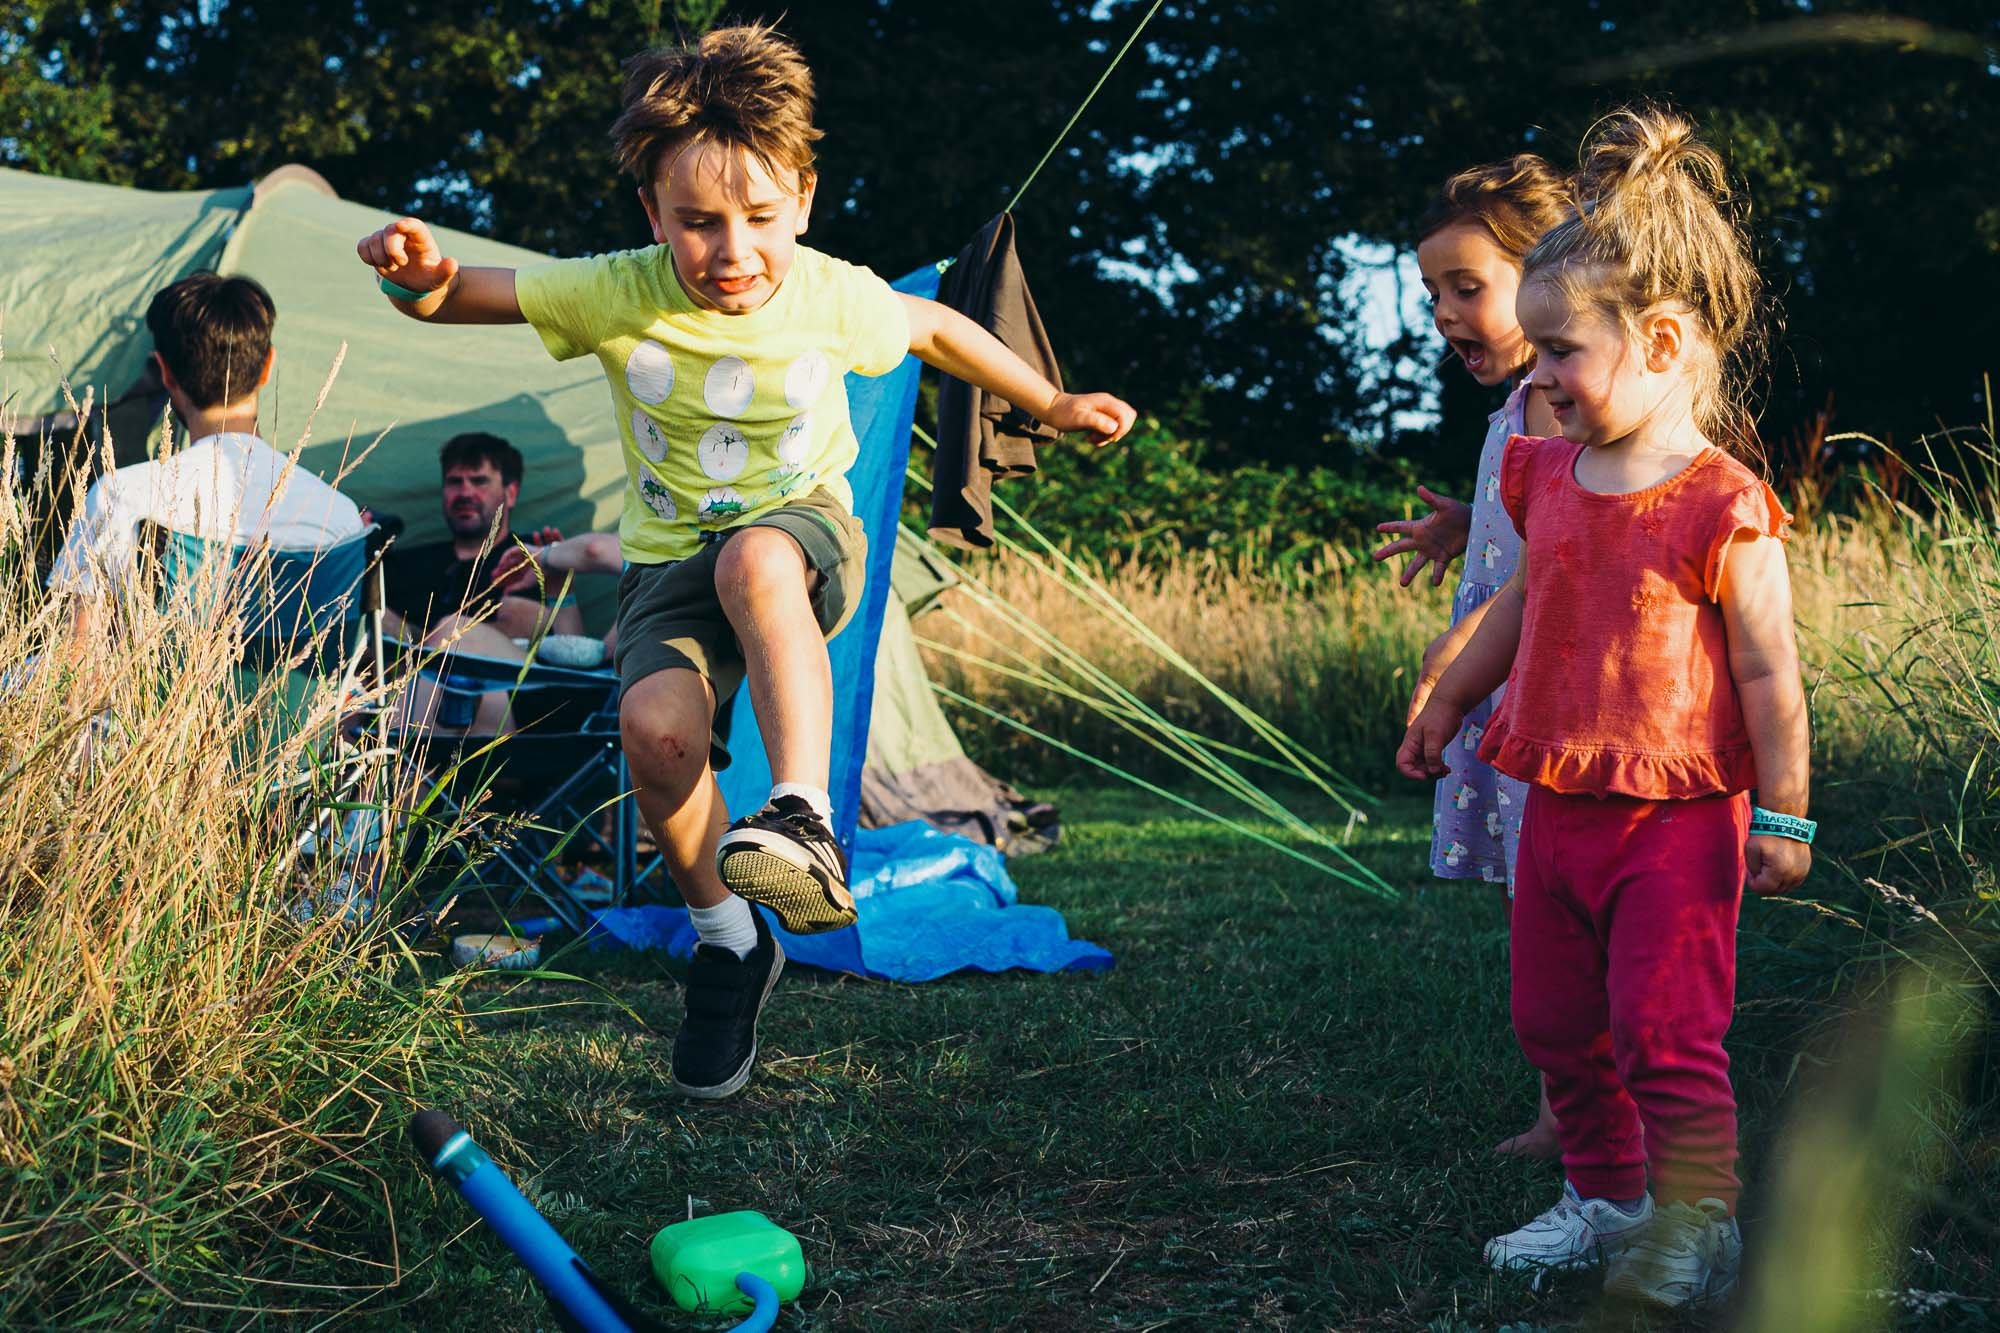 boy-jumping-rocket-launcher-girls-watching-unposed-family-photography-sussex-ditchling-campsite.jpg